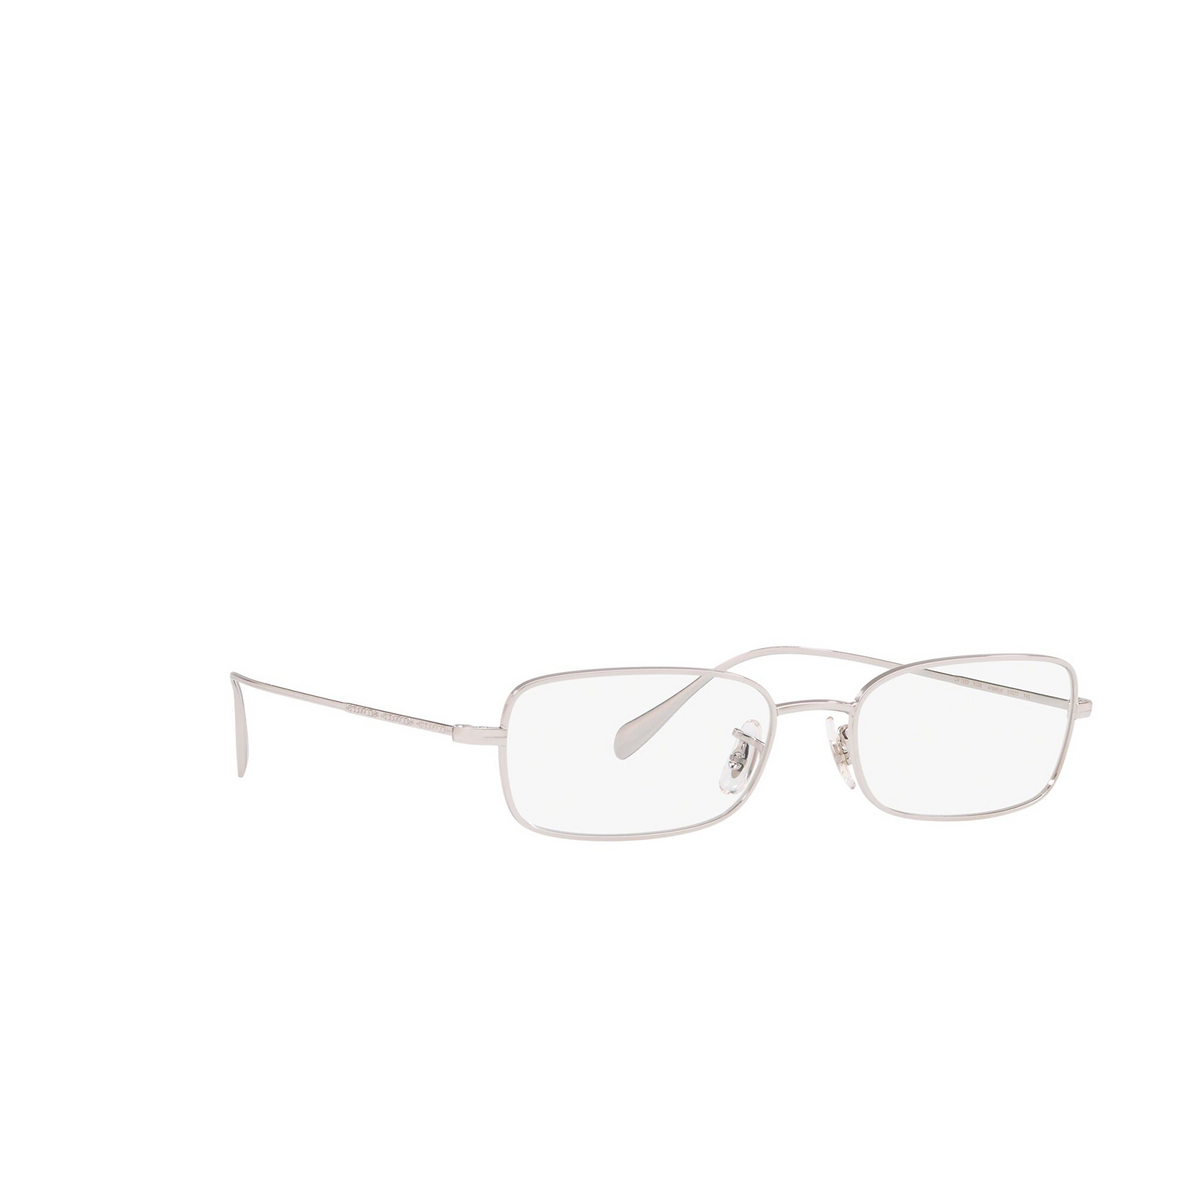 Oliver Peoples® Rectangle Eyeglasses: Aronson OV1253 color Silver 5036 - three-quarters view.